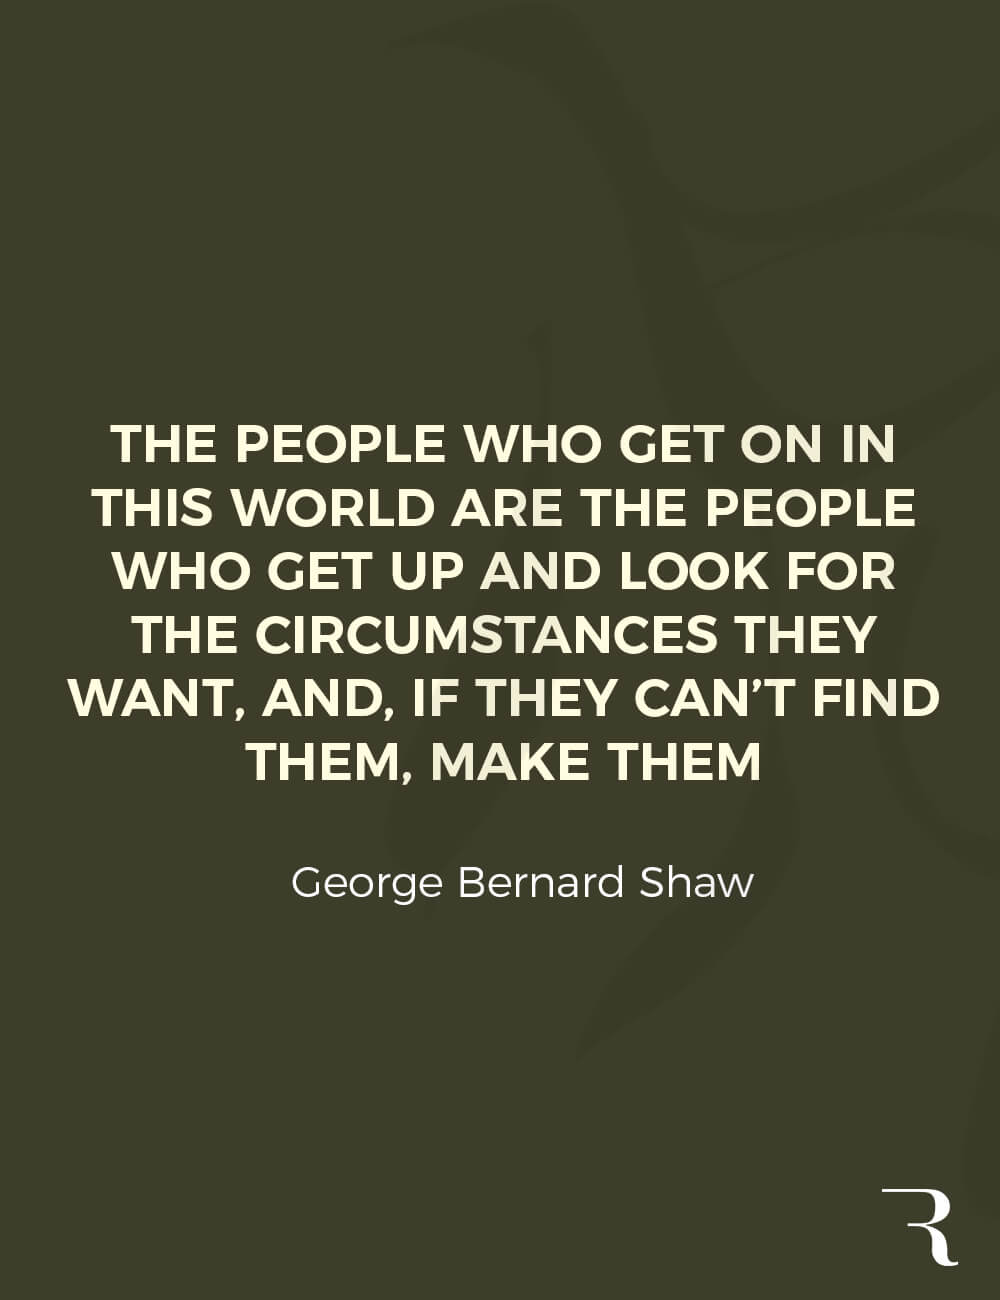 Motivational Quotes: "The people who get on in this world, look for the circumstances they want, or make them." 112 Motivational Quotes to Be a Better Entrepreneur